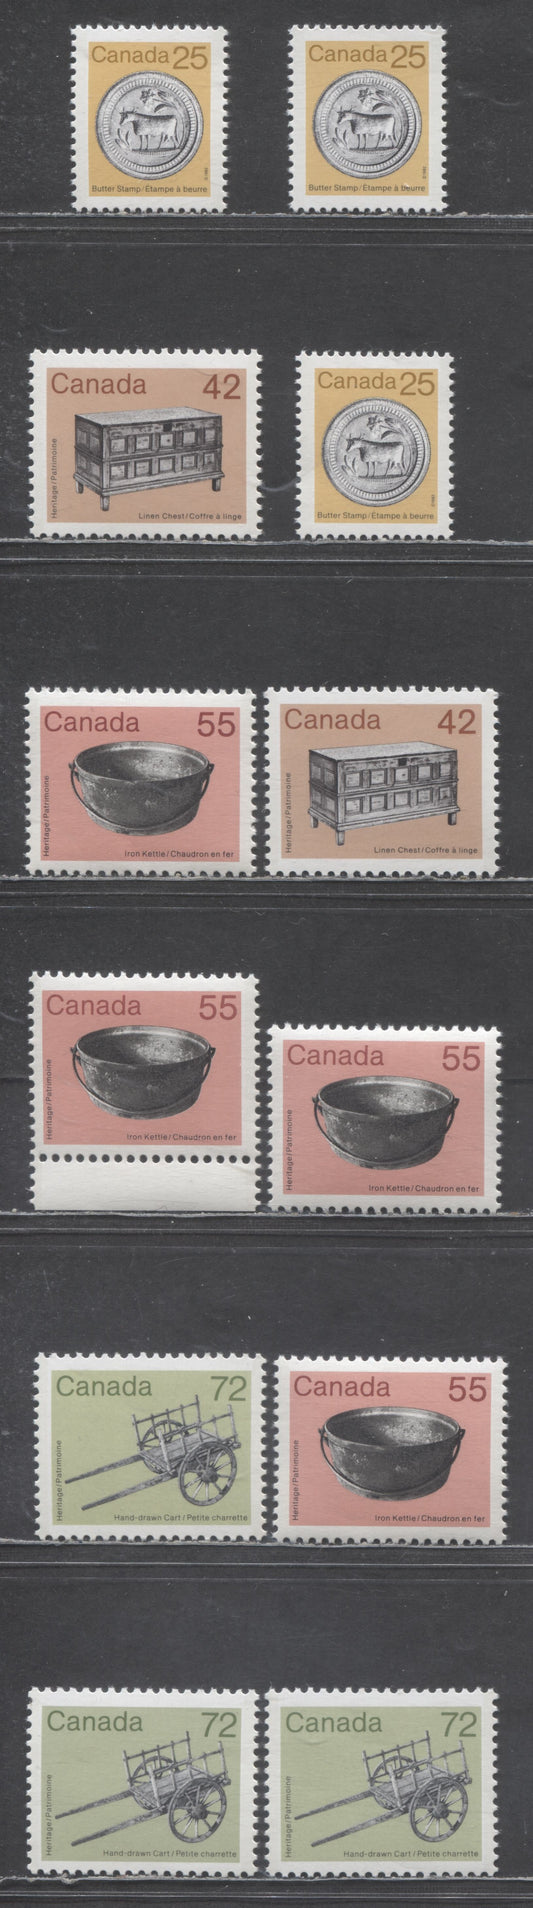 Canada #1080, 1081i,iii, 1082, 1083-iii 25c-72c Yellow/Apple Green & Multicolored Butter Stamp - Hand-Drawn Cart Issues, 1987-1988 Artifact Definitives, 12 VFNH Singles With Various Harrison & Rolland Papers, With Shade Varieties